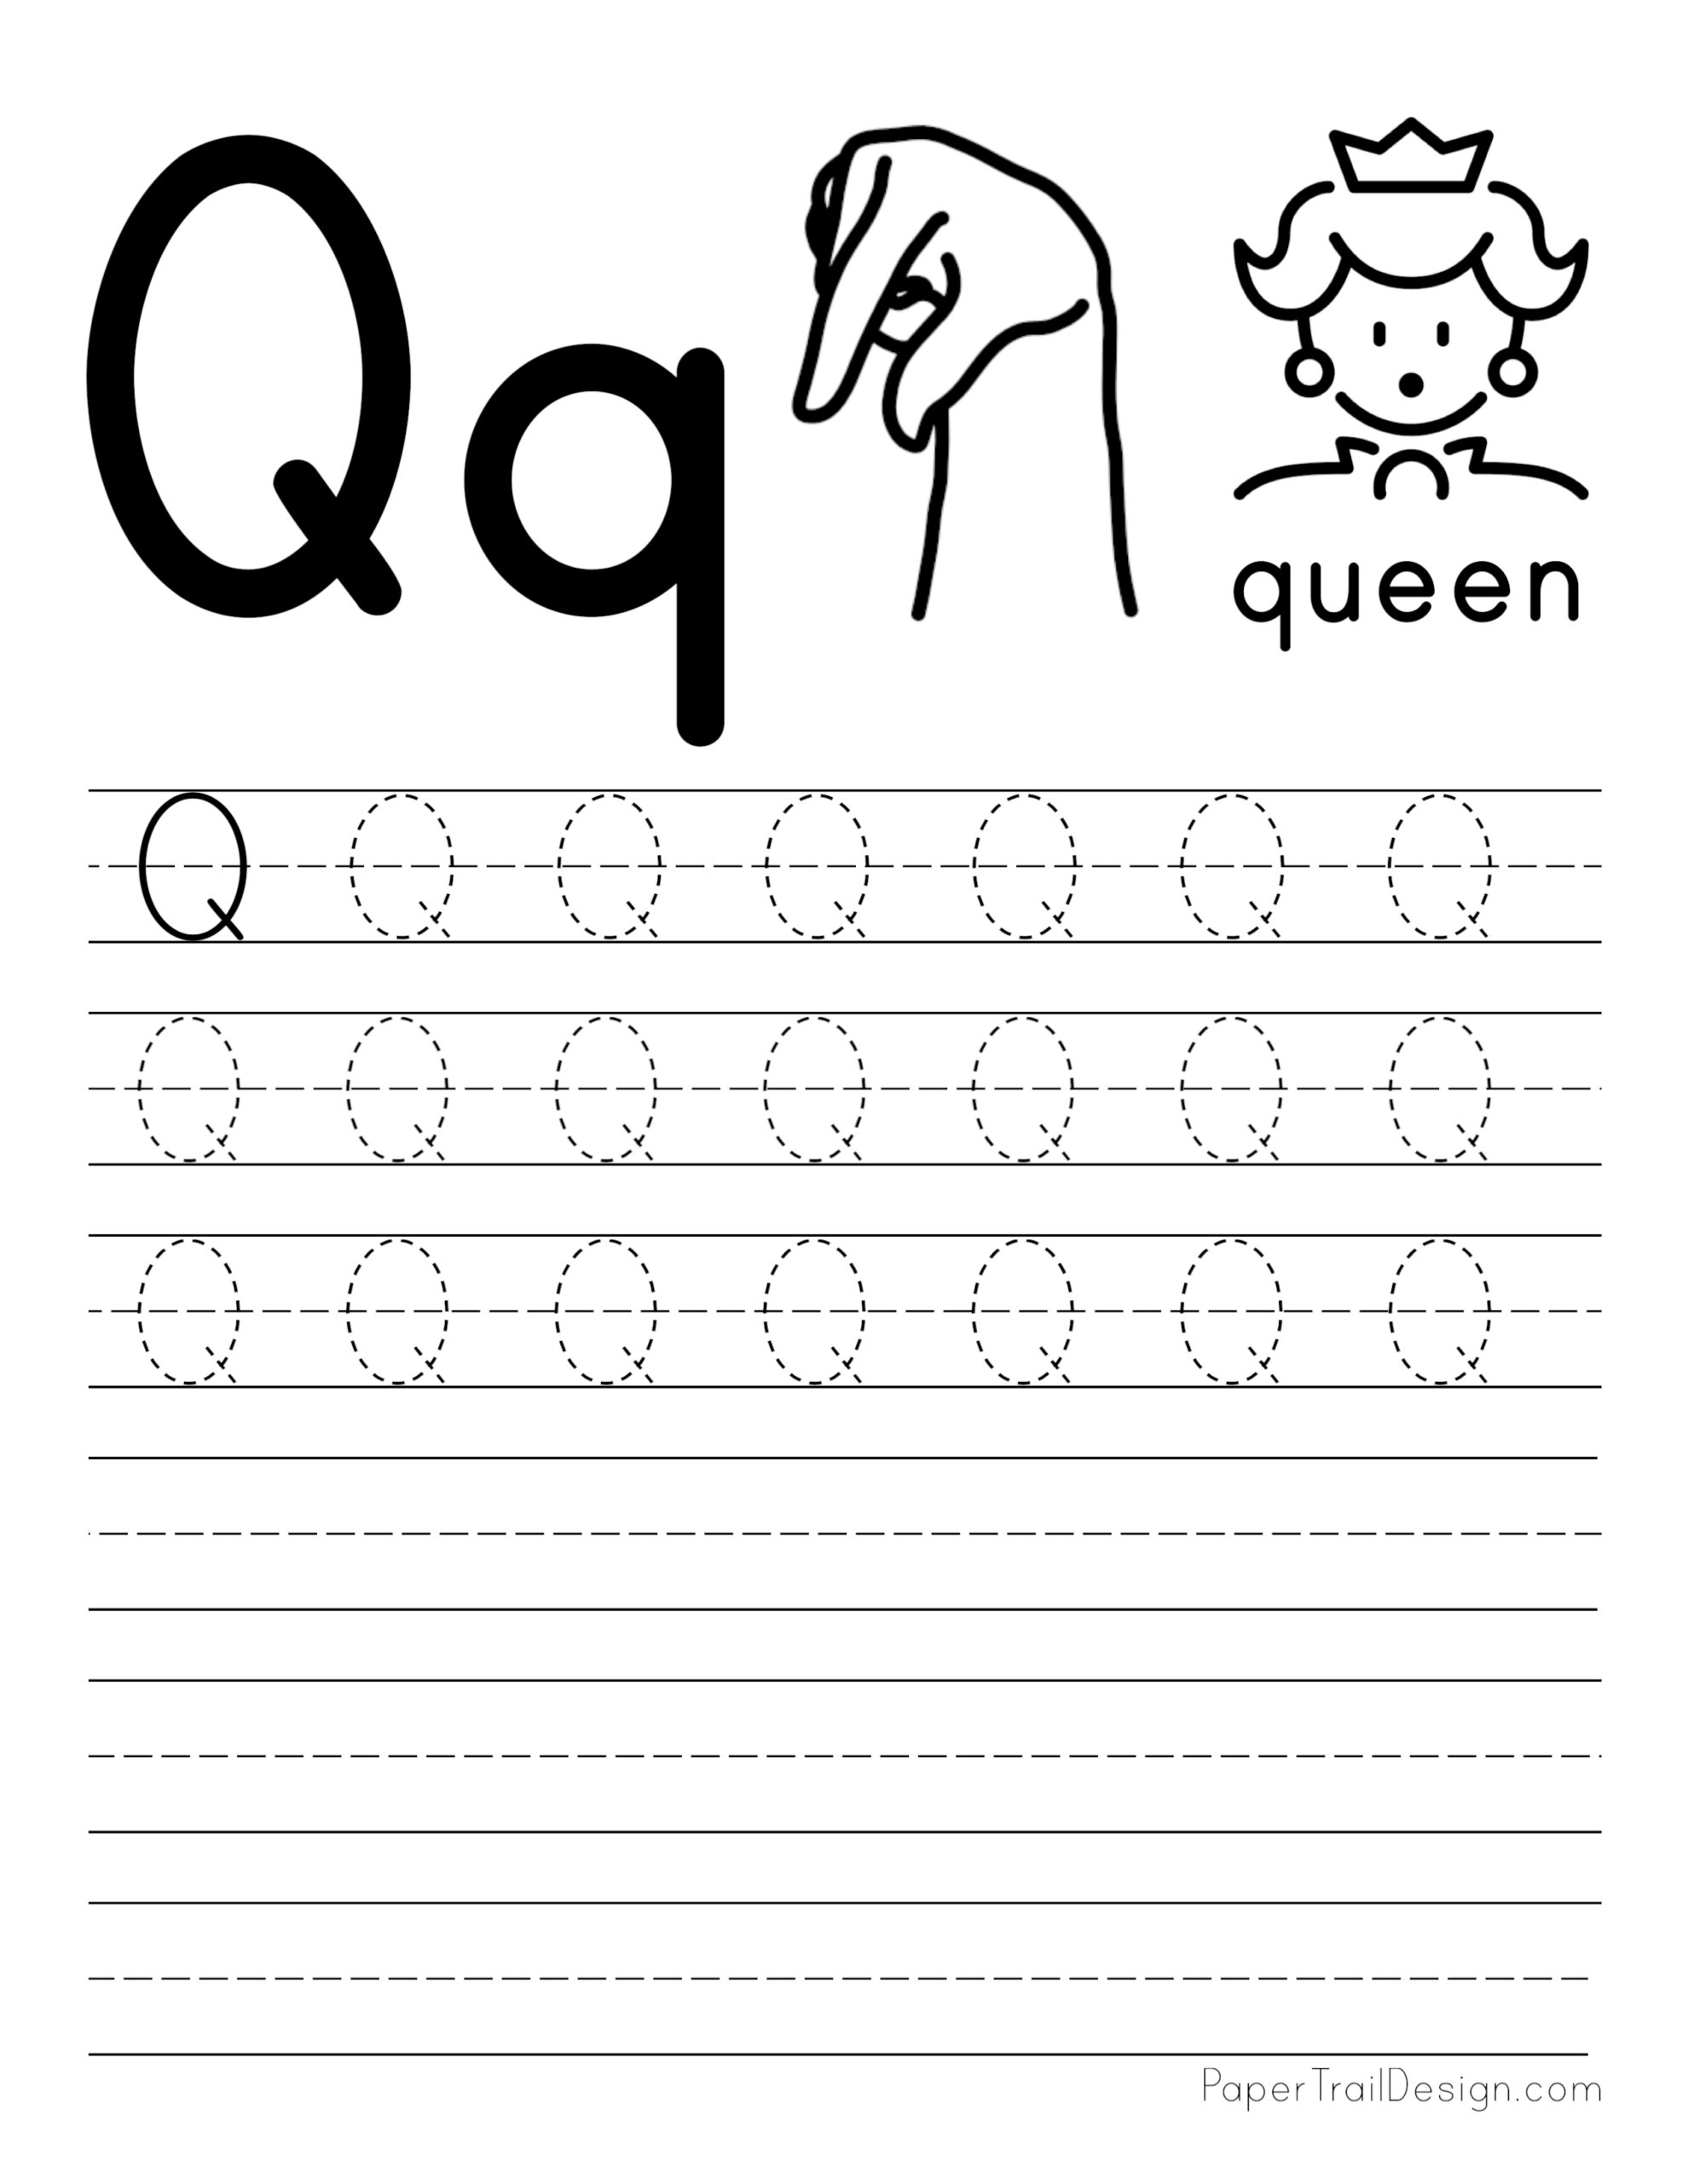 free-letter-q-tracing-worksheets-lowercase-letter-q-tracing